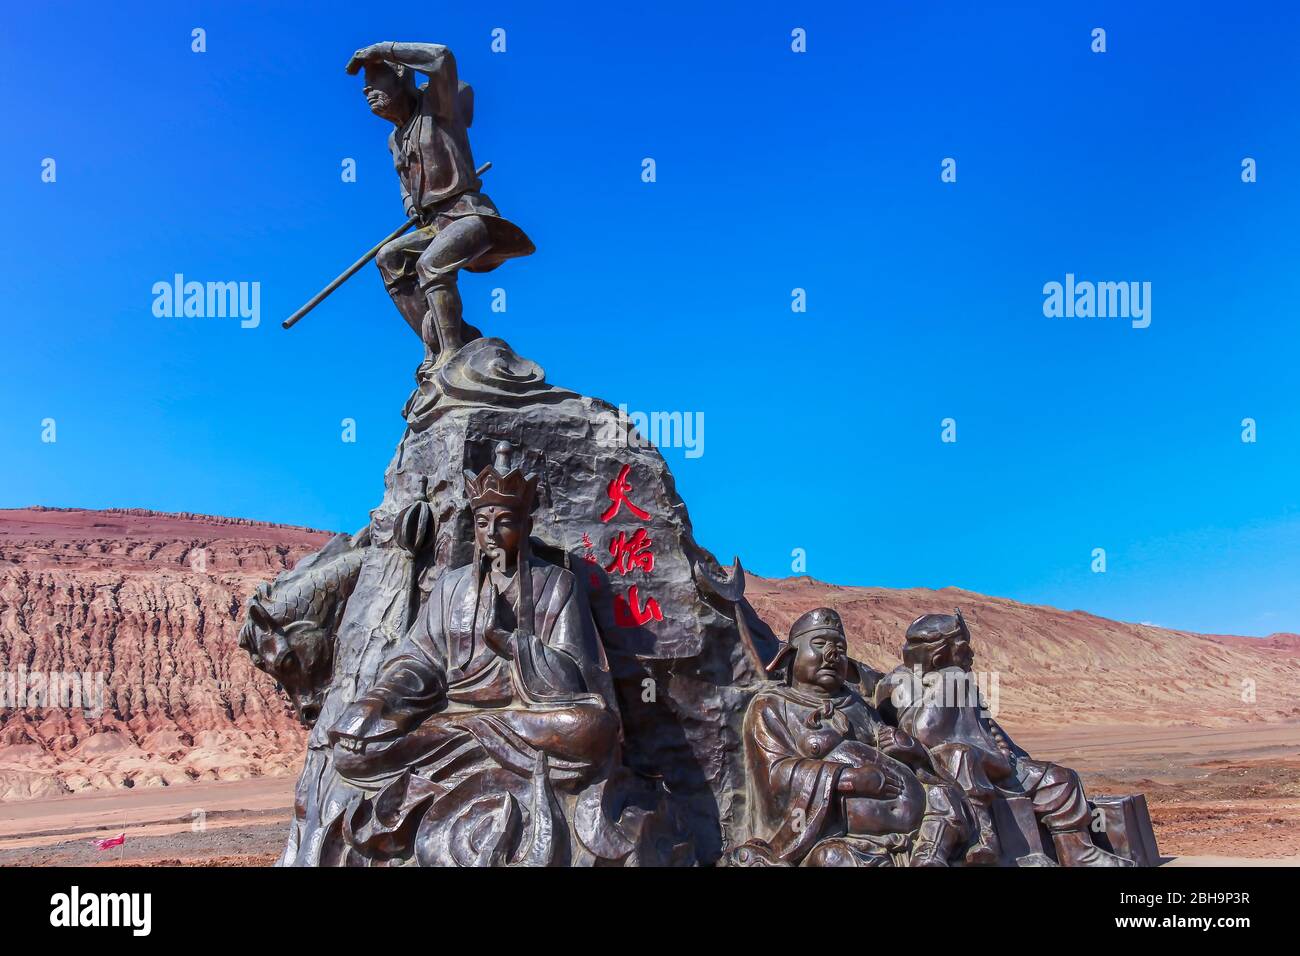 Turpan Xinjiang China 11th July 14 Bronze Statue Of The Monkey King Known As Sun Wukong At The Flaming Mountains Stock Photo Alamy